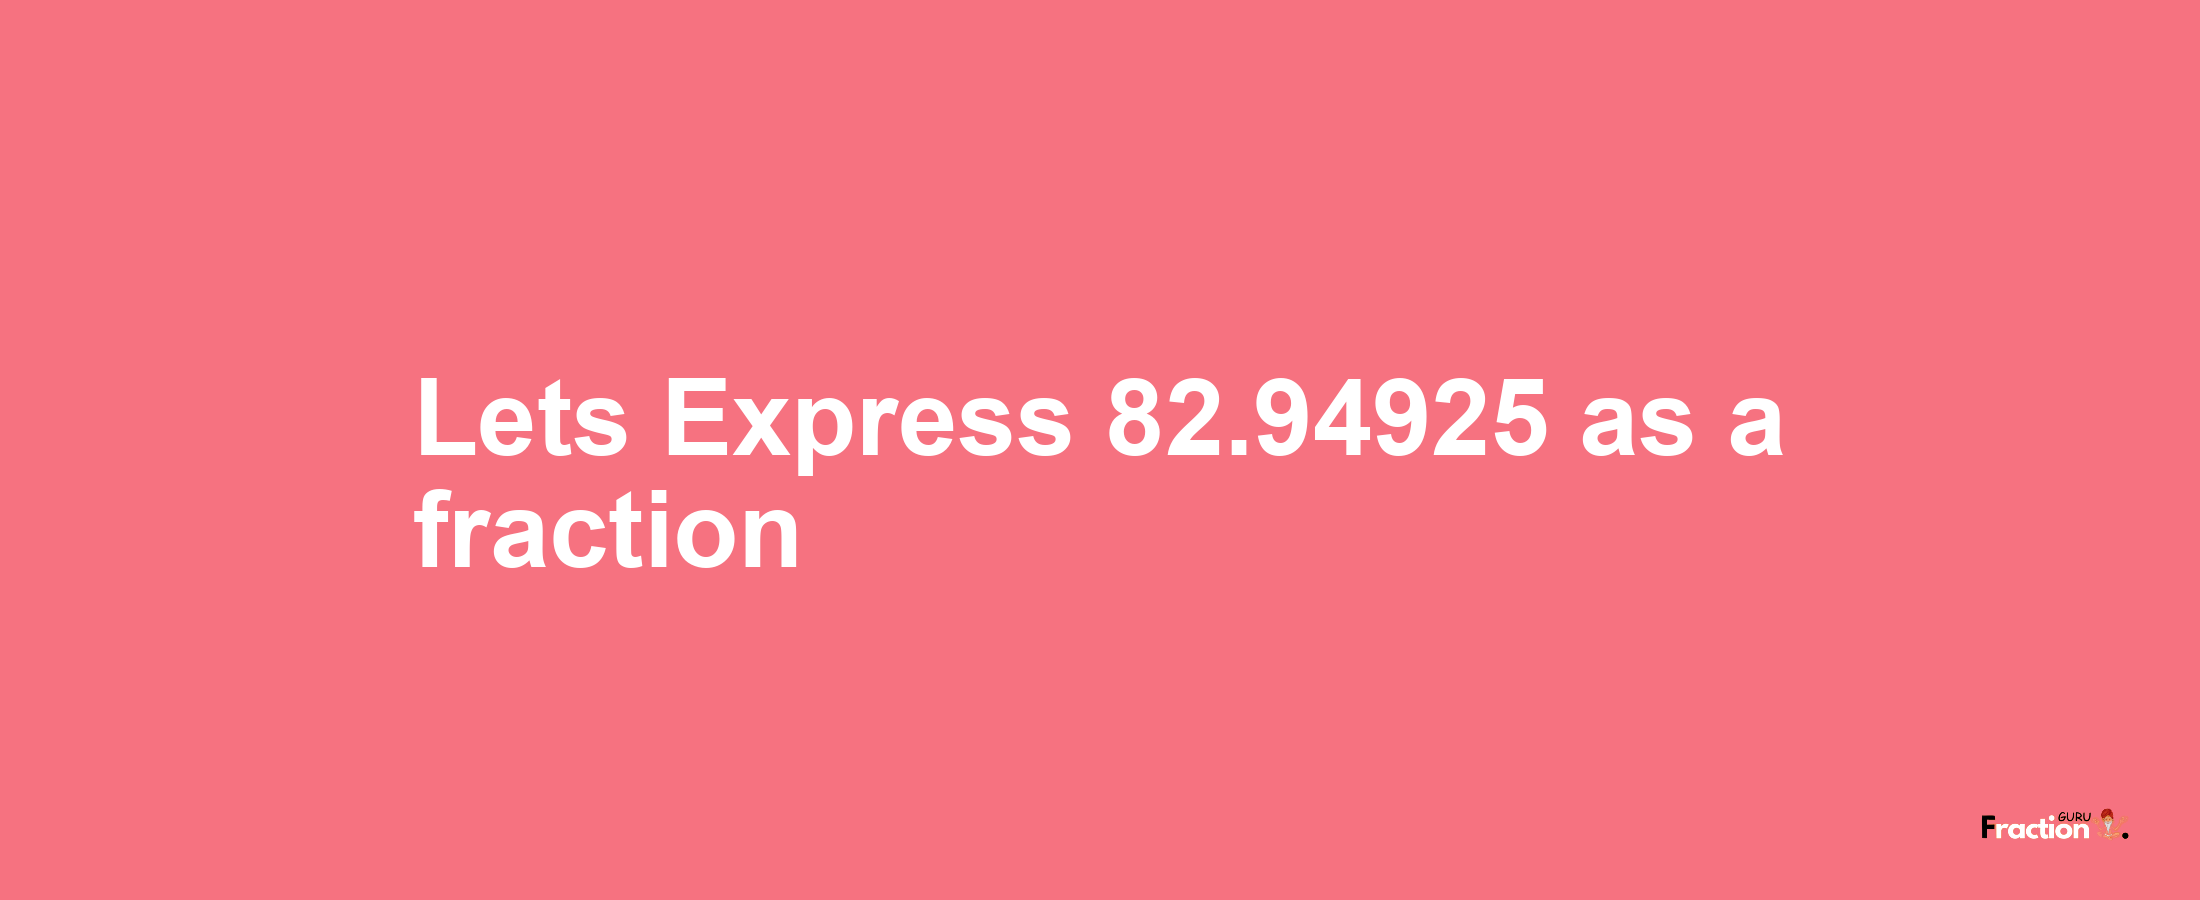 Lets Express 82.94925 as afraction